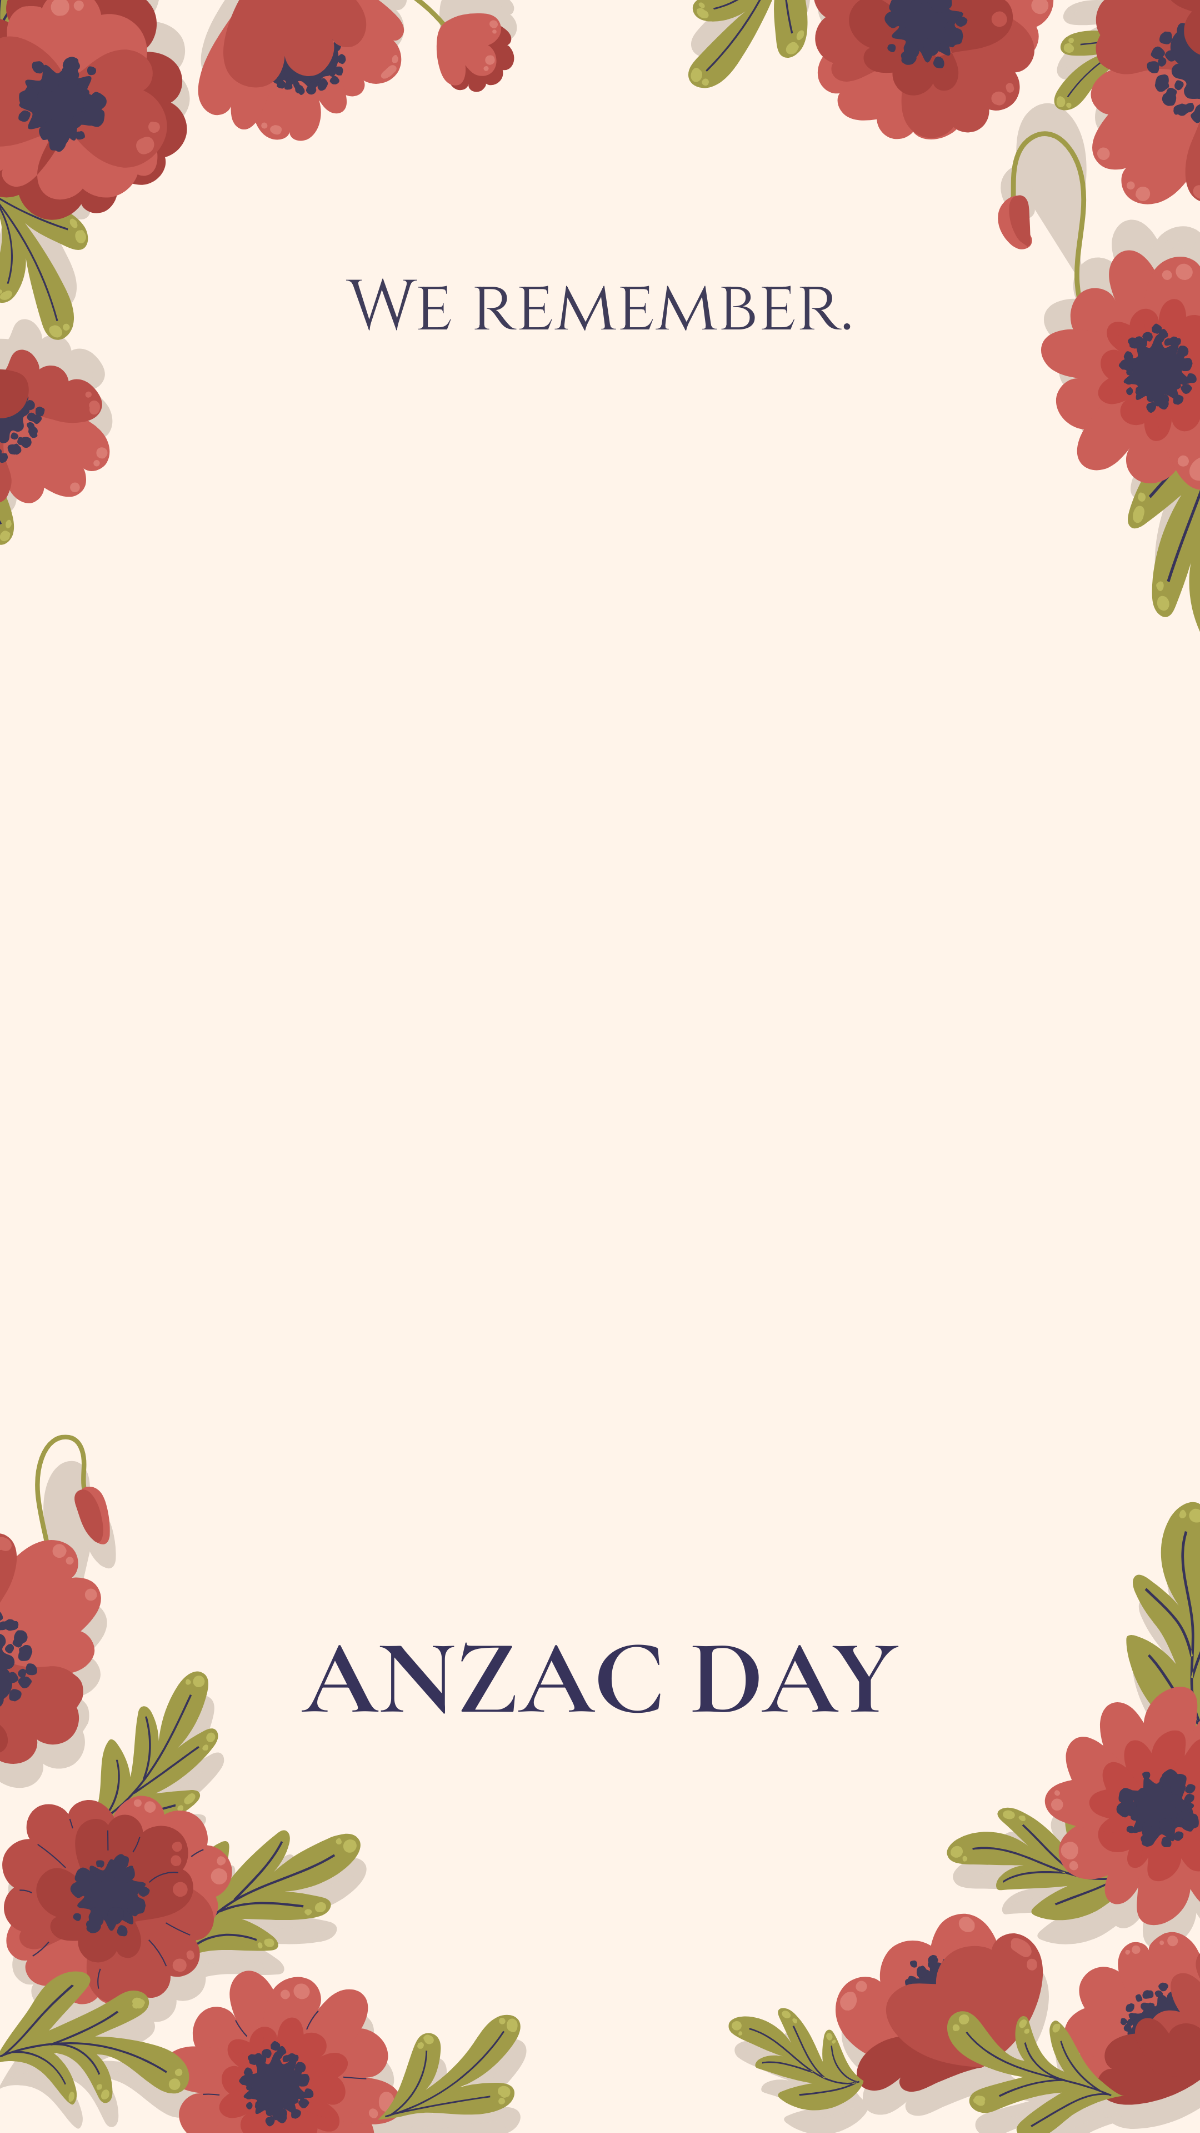 Free Anzac Day Snapchat Geofilter Template